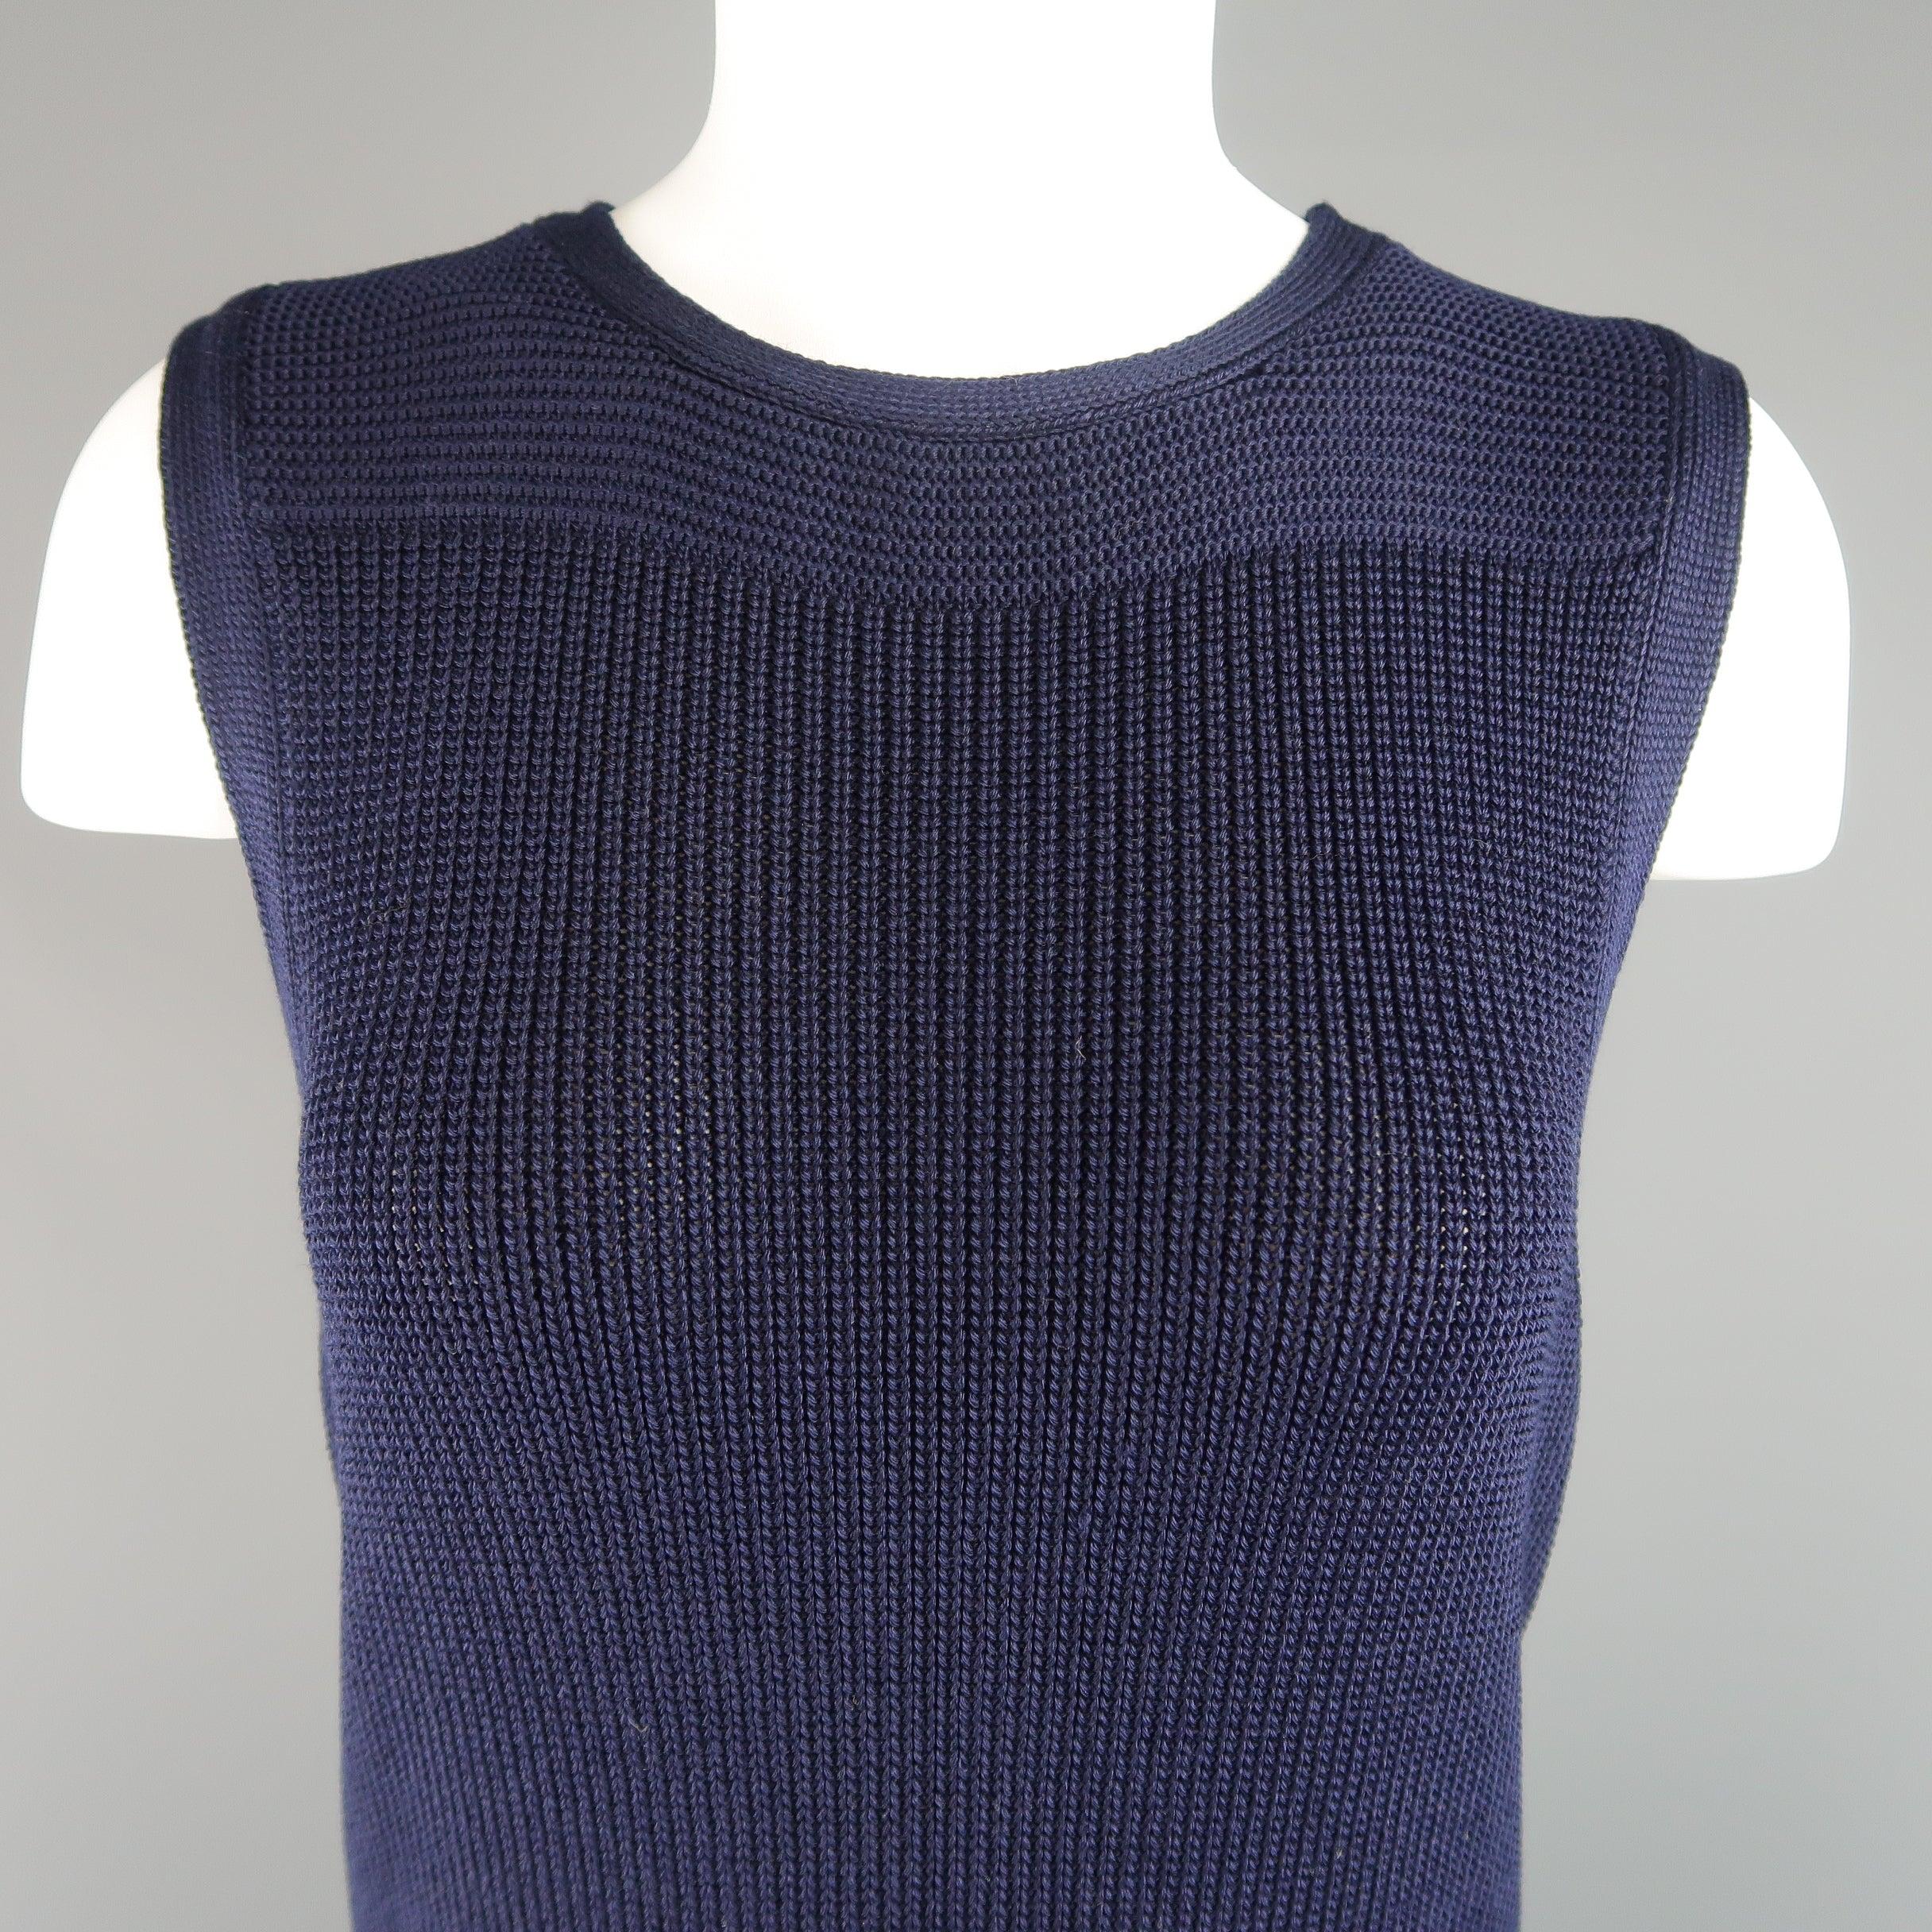 RALPH LAUREN Collection sweater vest top comes in navy blue silk blend textured knit and features a round neckline, extended length, and side slits. Wear throughout knit. Made in Italy.Good Pre-Owned Condition. 

Marked:   M 

Measurements: 
 